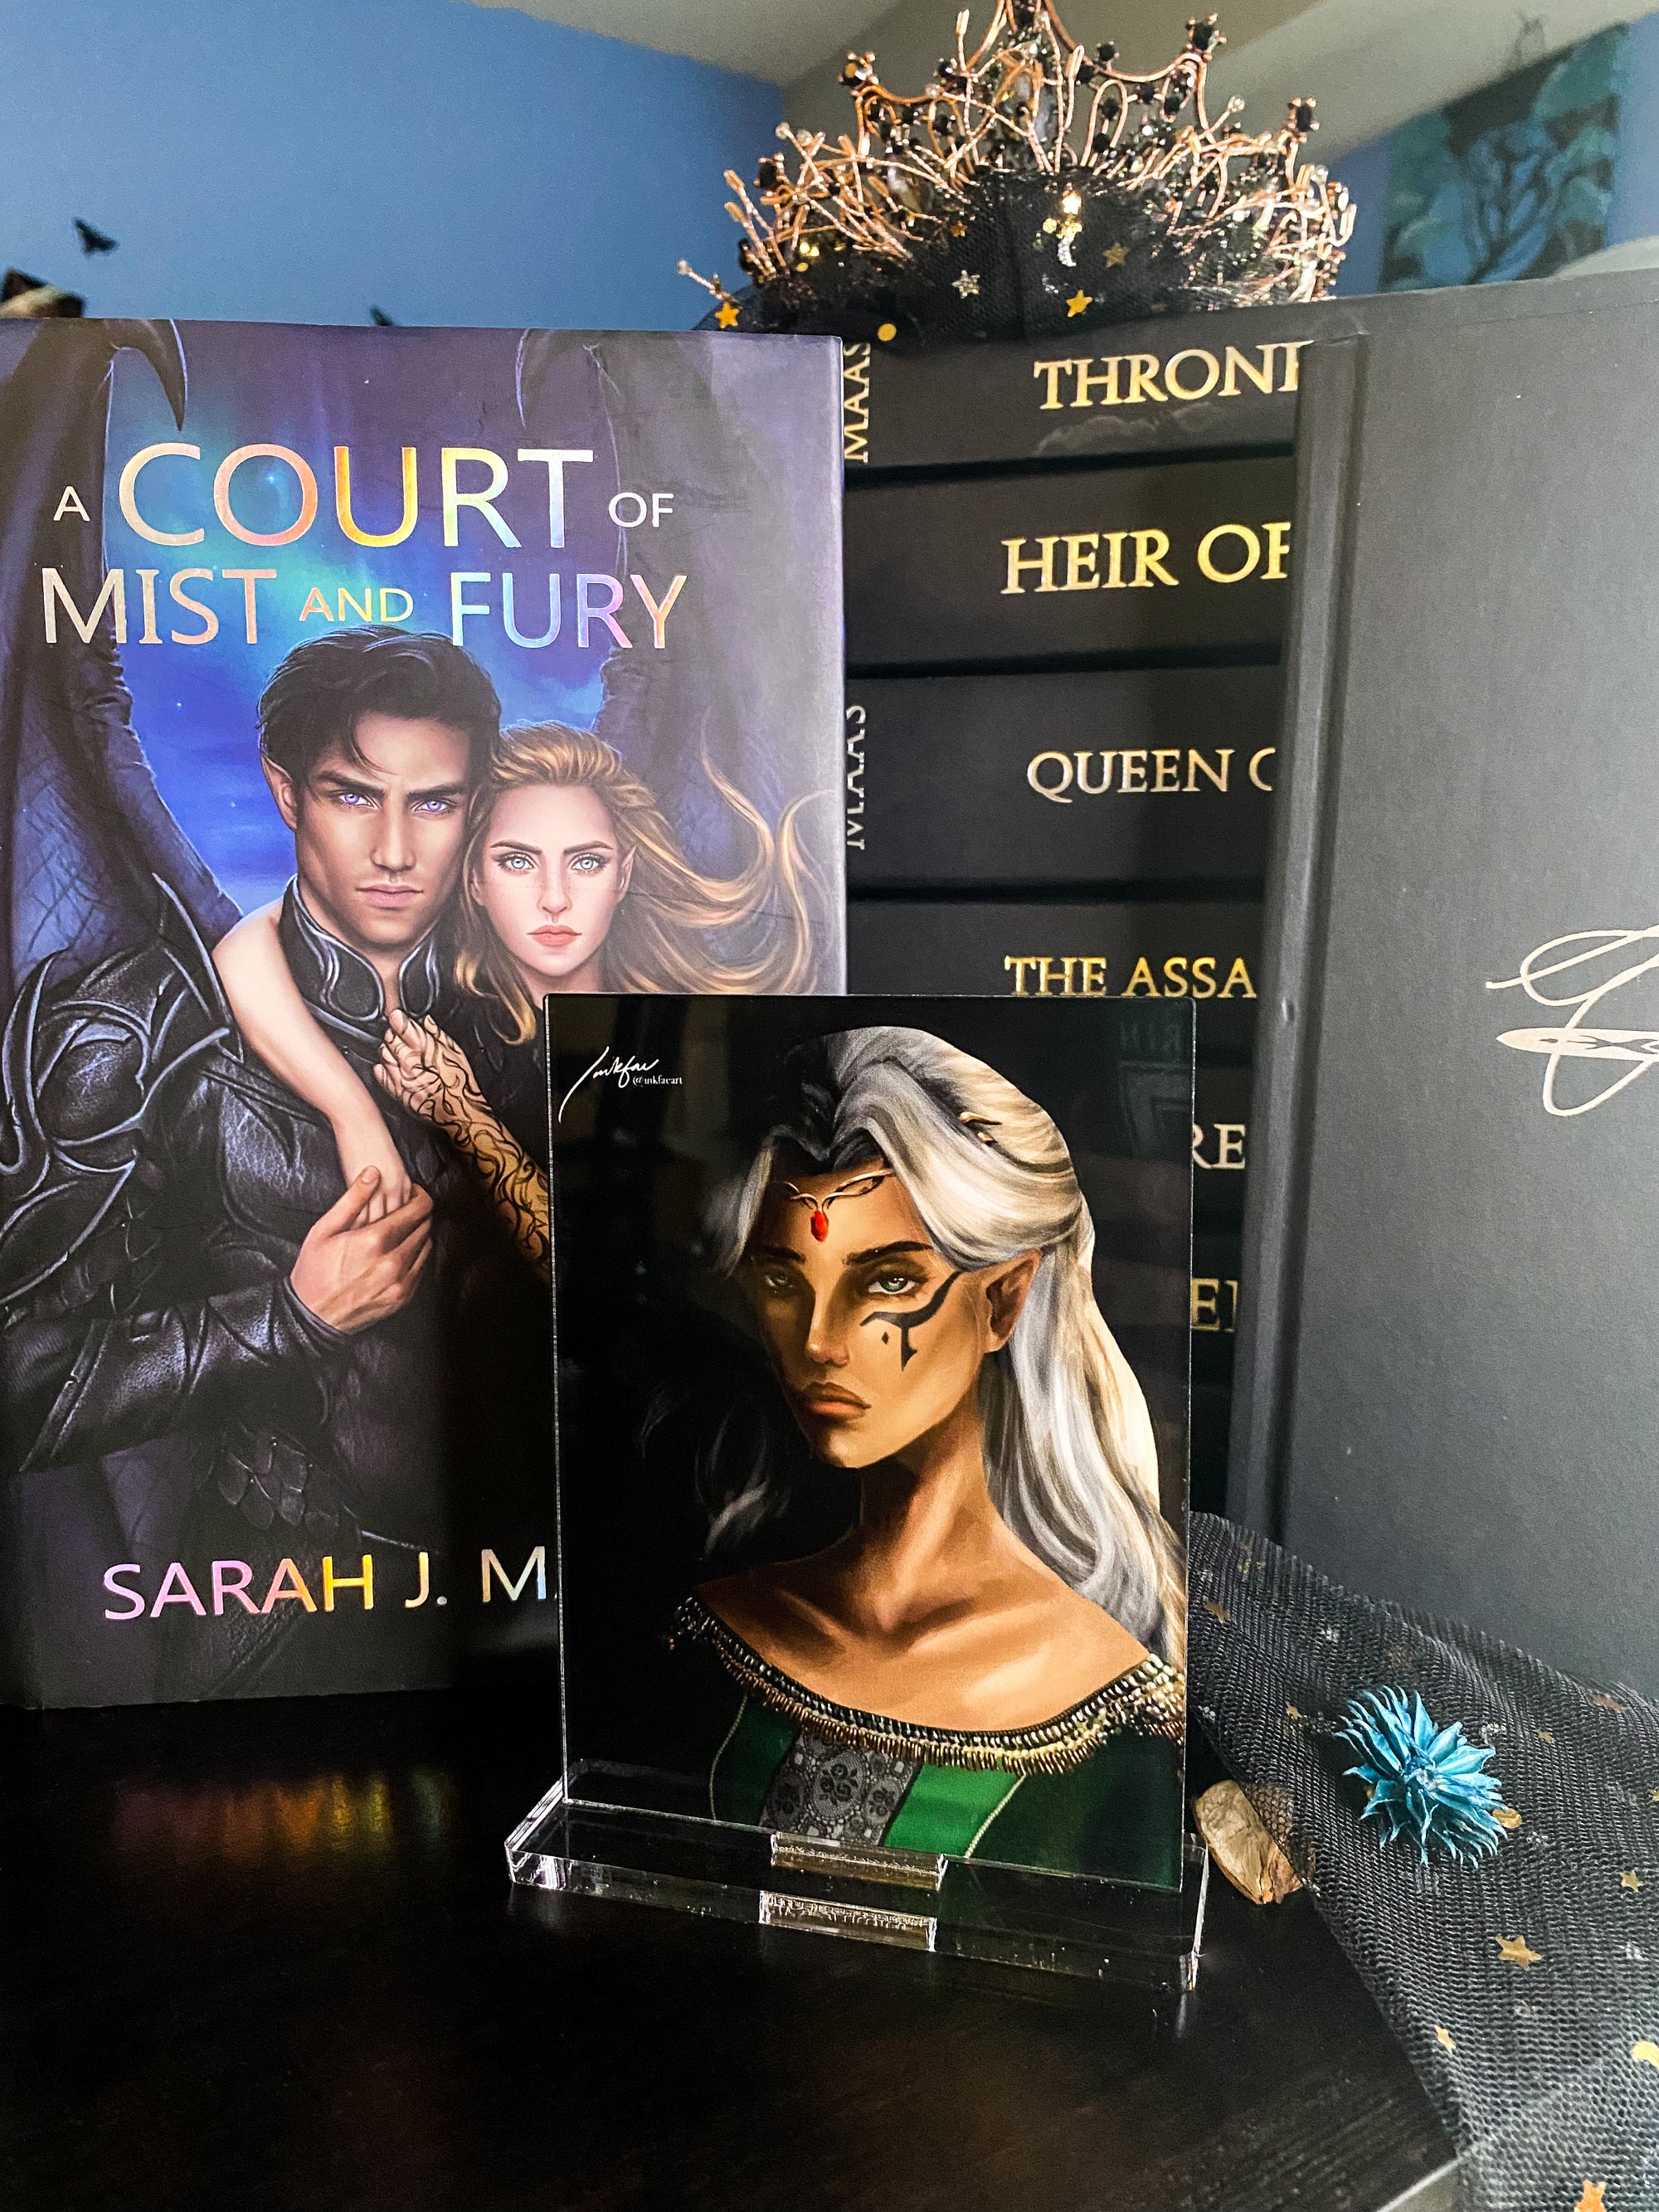 Heir of Snow and Fire - Fan Art from @InkFaeArt - Freestanding Bookshelf / Desktop Acrylic Accessory - Officially licensed by Sarah J. Maas - FA21